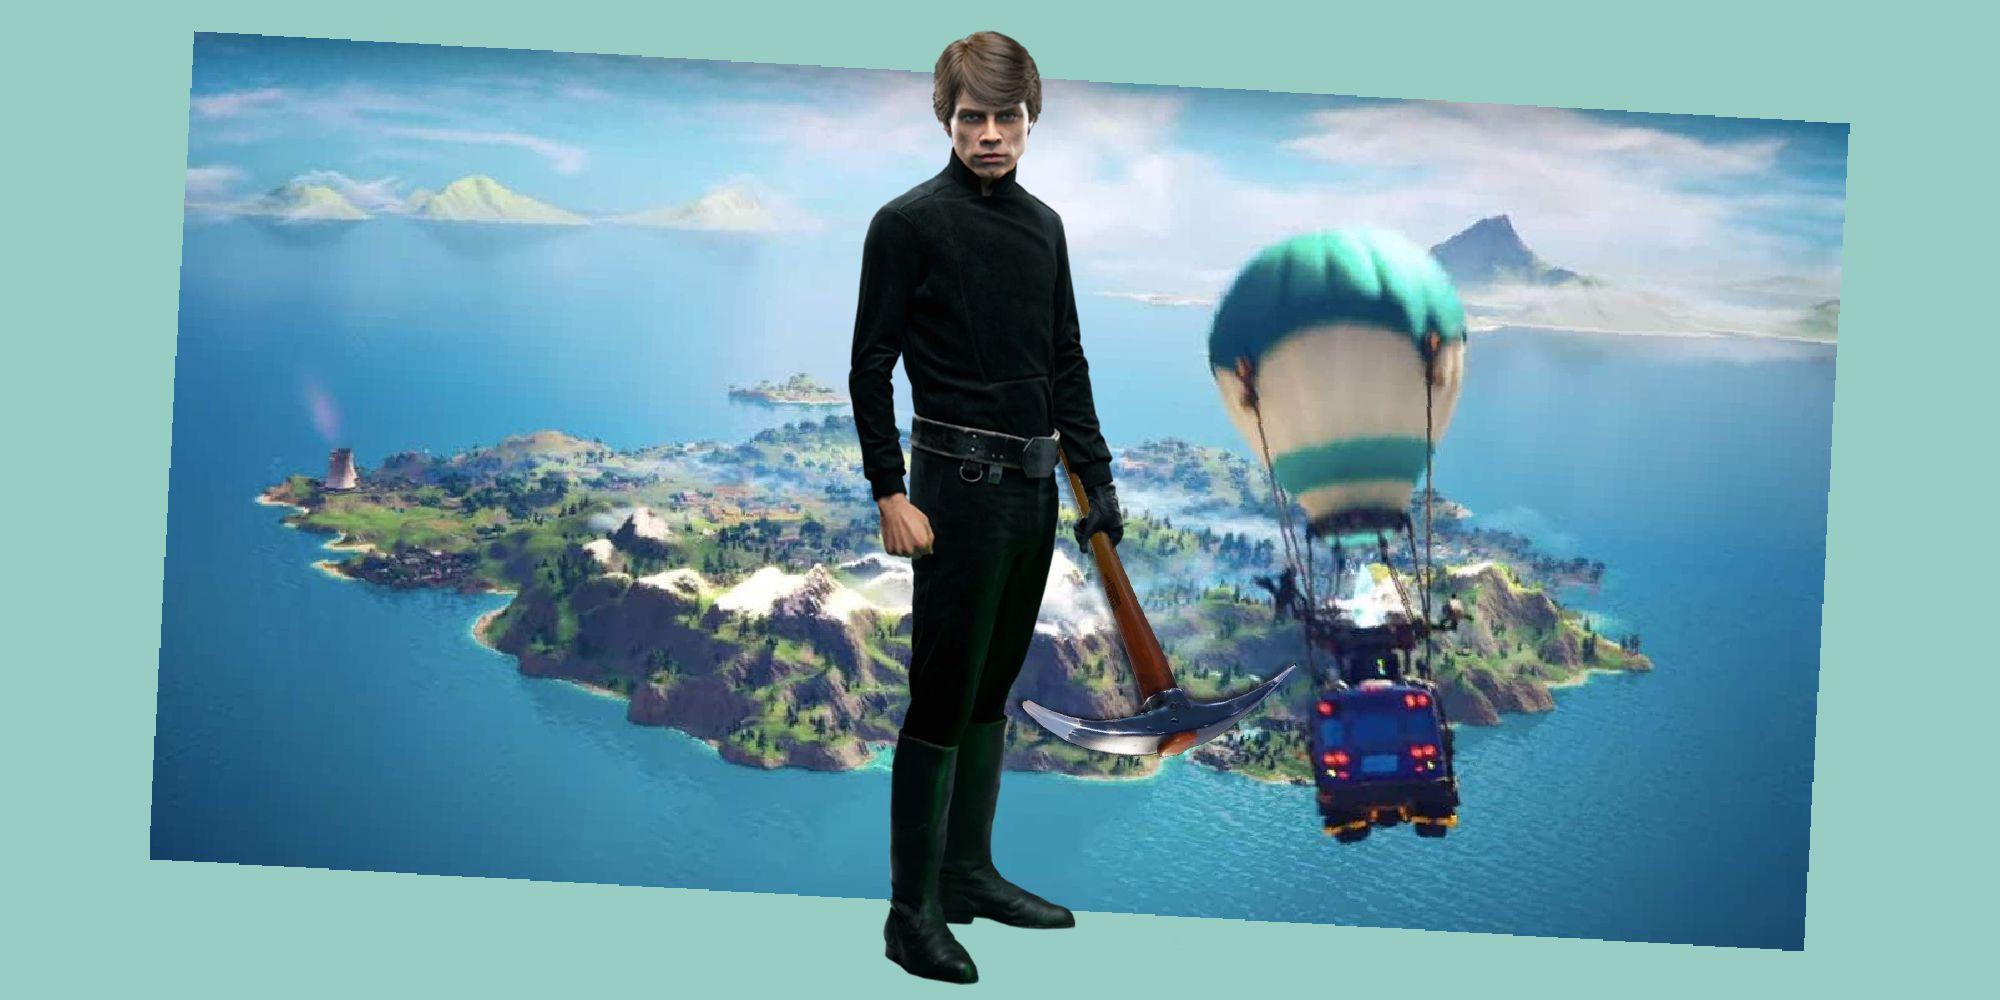 Three years after the first collaboration between Star Wars and Fortnite, Luke Skywalker can finally join the game.